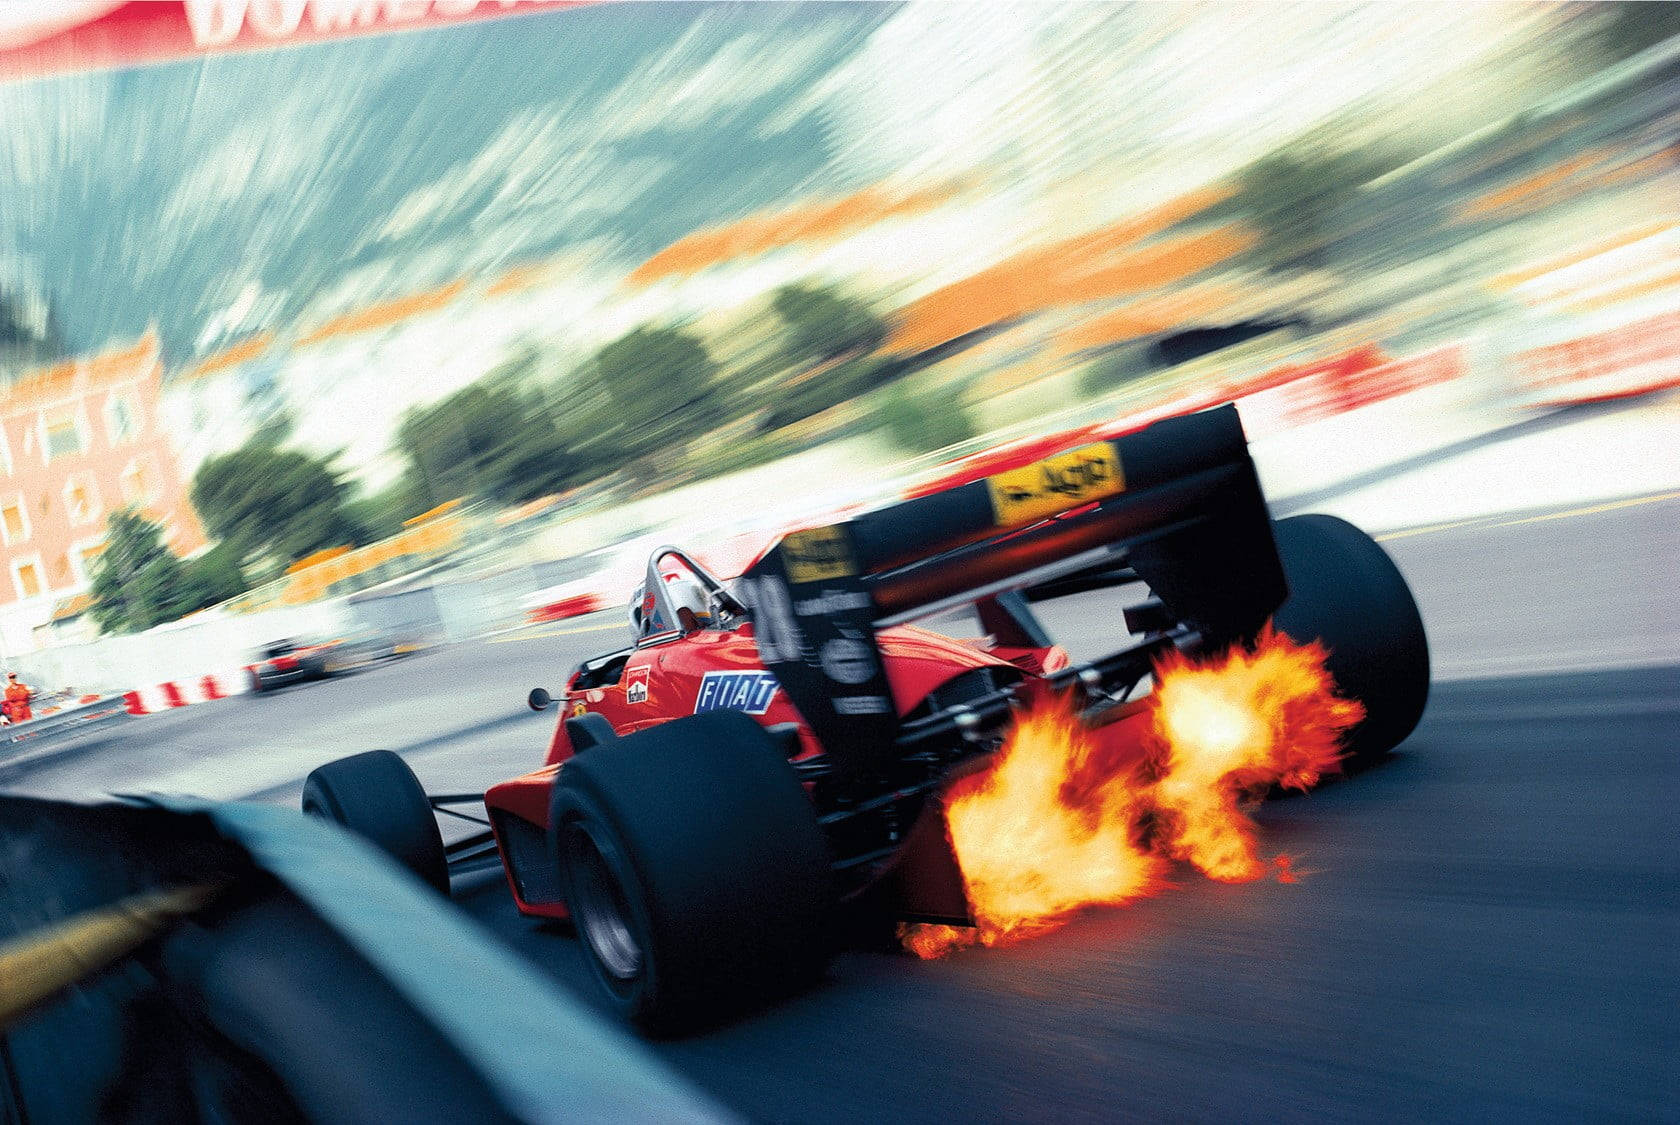 F1 Racing Car Exhaust Flames Background